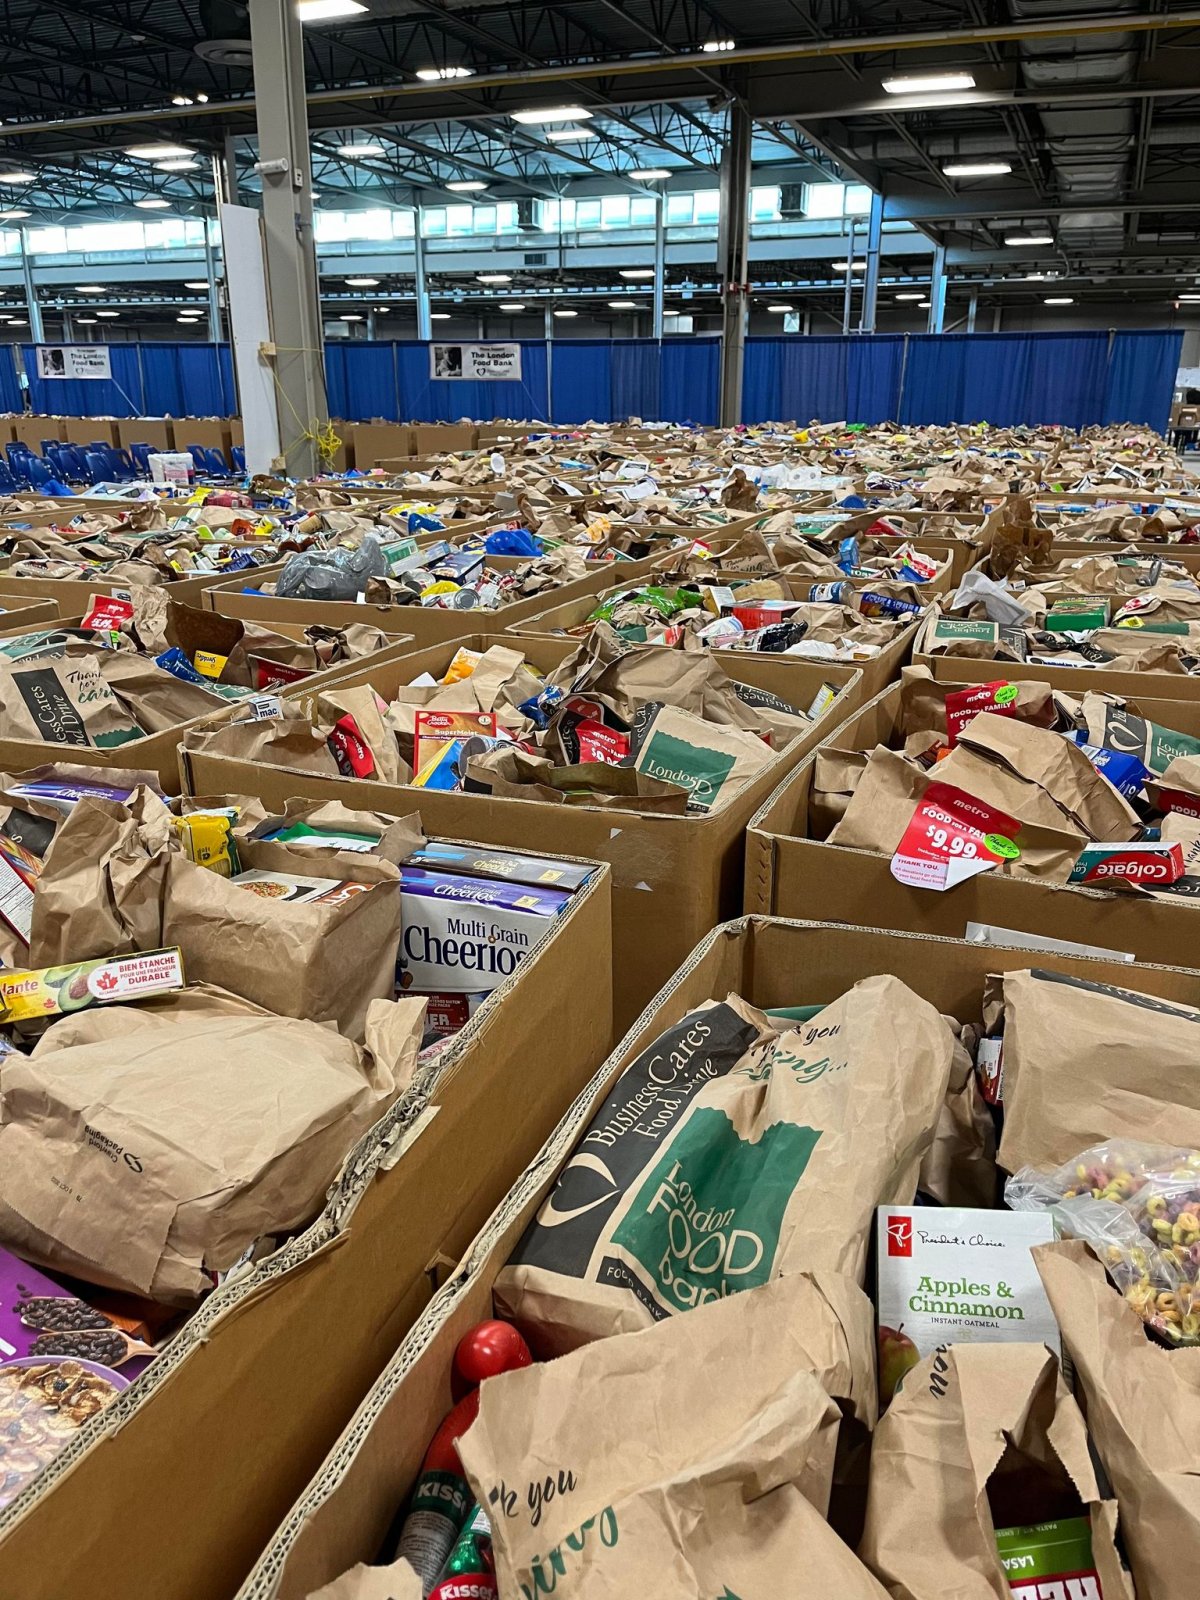 627,000 pounds worth of food and cash donations were collected, all of which will go to the London Food bank and the over 35 programs and organisations it supports.